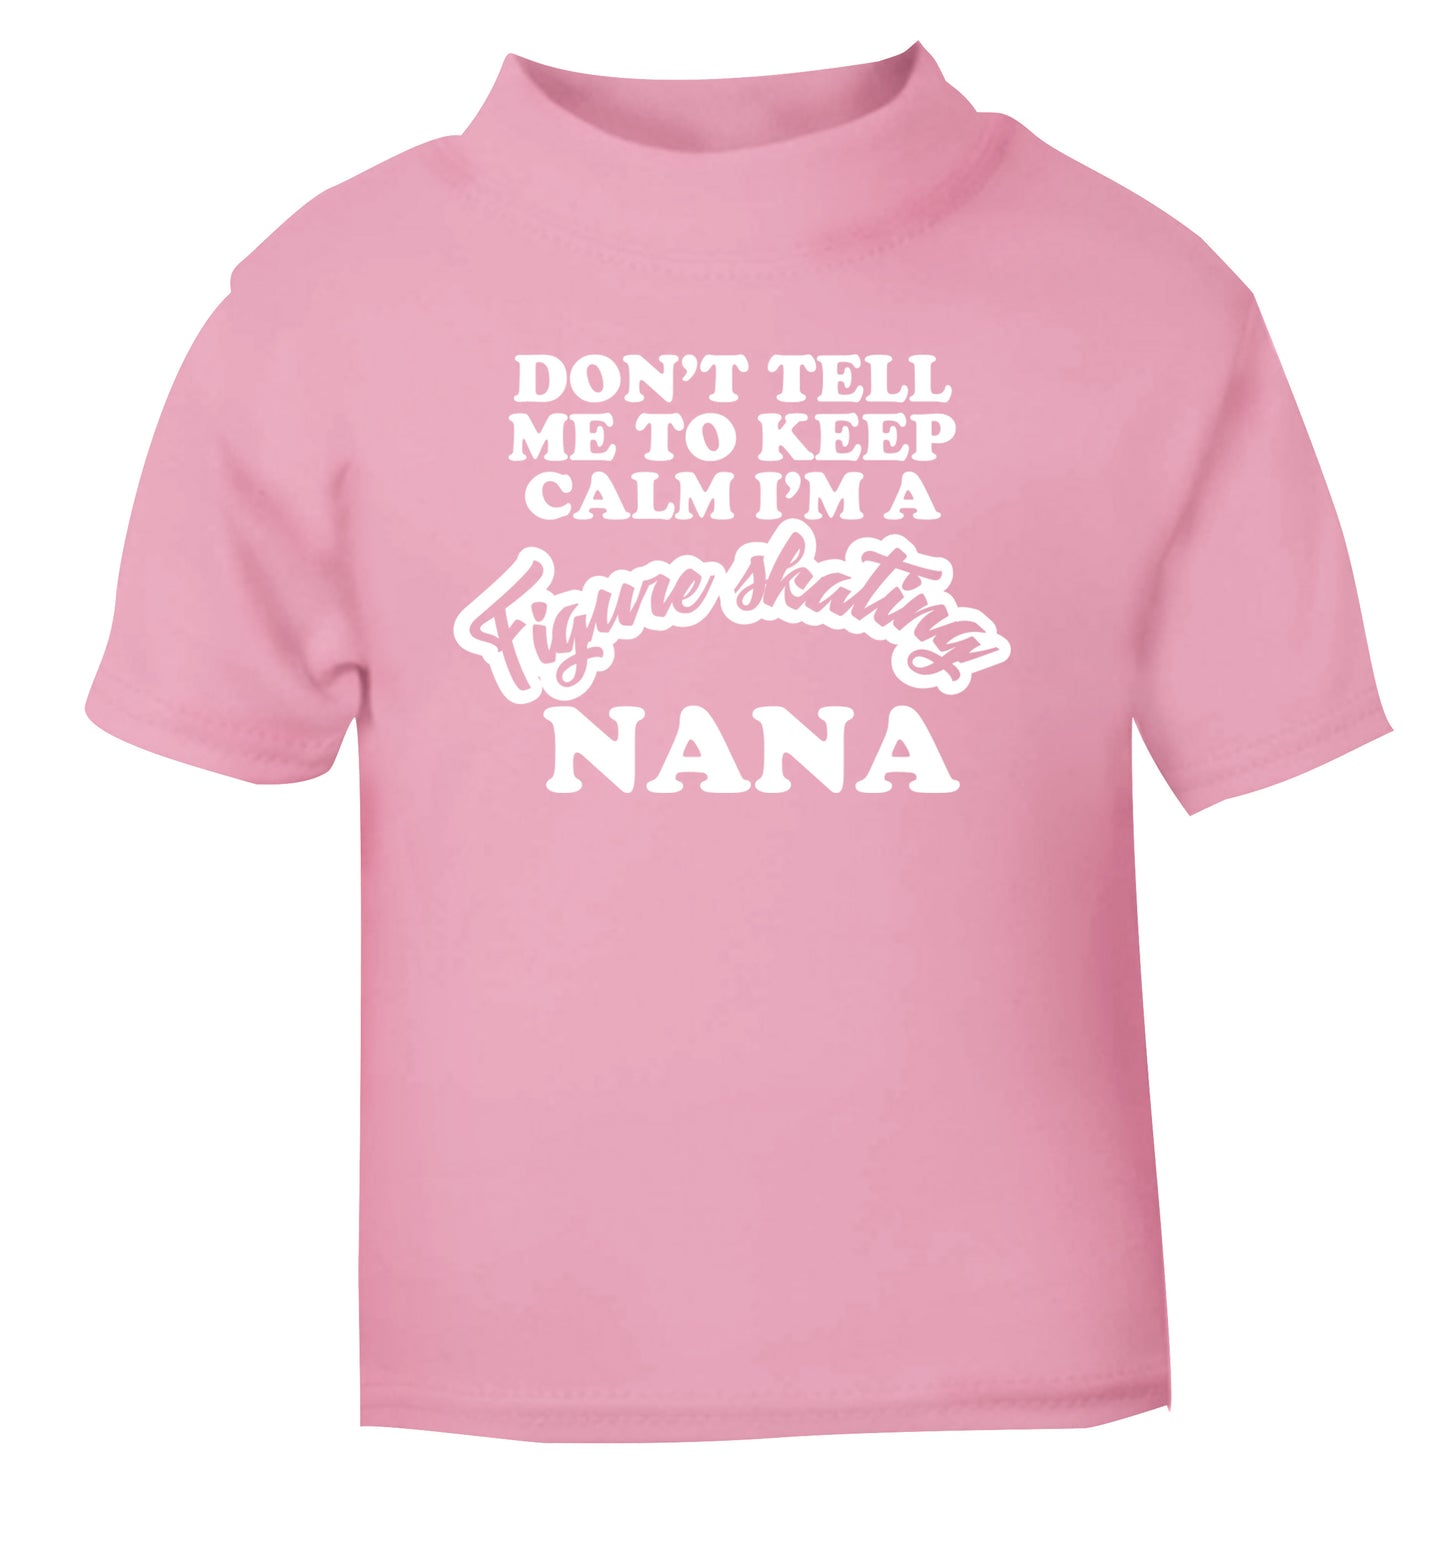 Don't tell me to keep calm I'm a figure skating nana light pink Baby Toddler Tshirt 2 Years